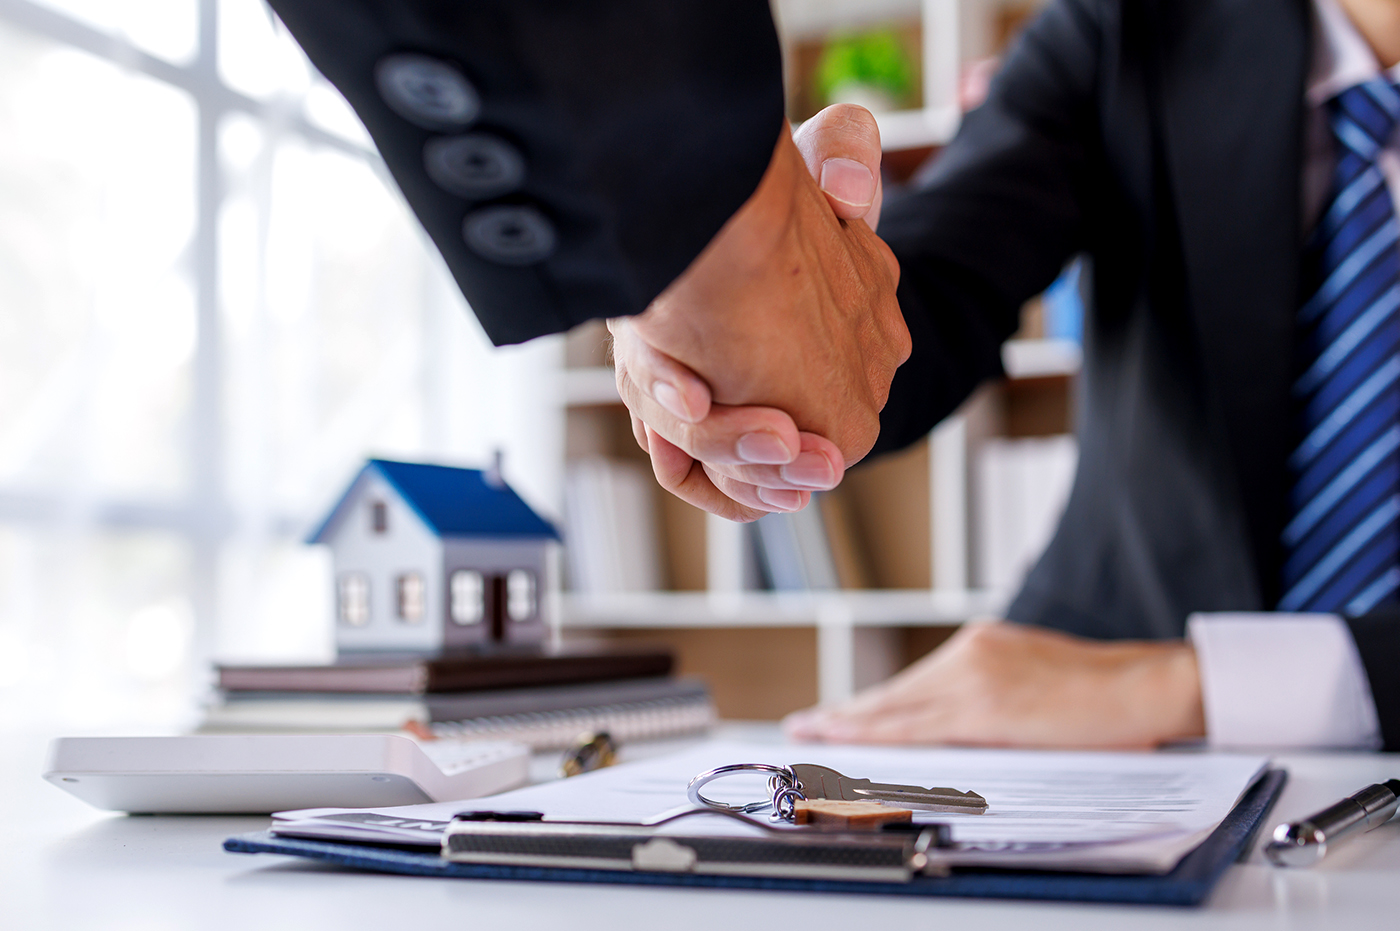 Two people shaking hands in an insurance office.